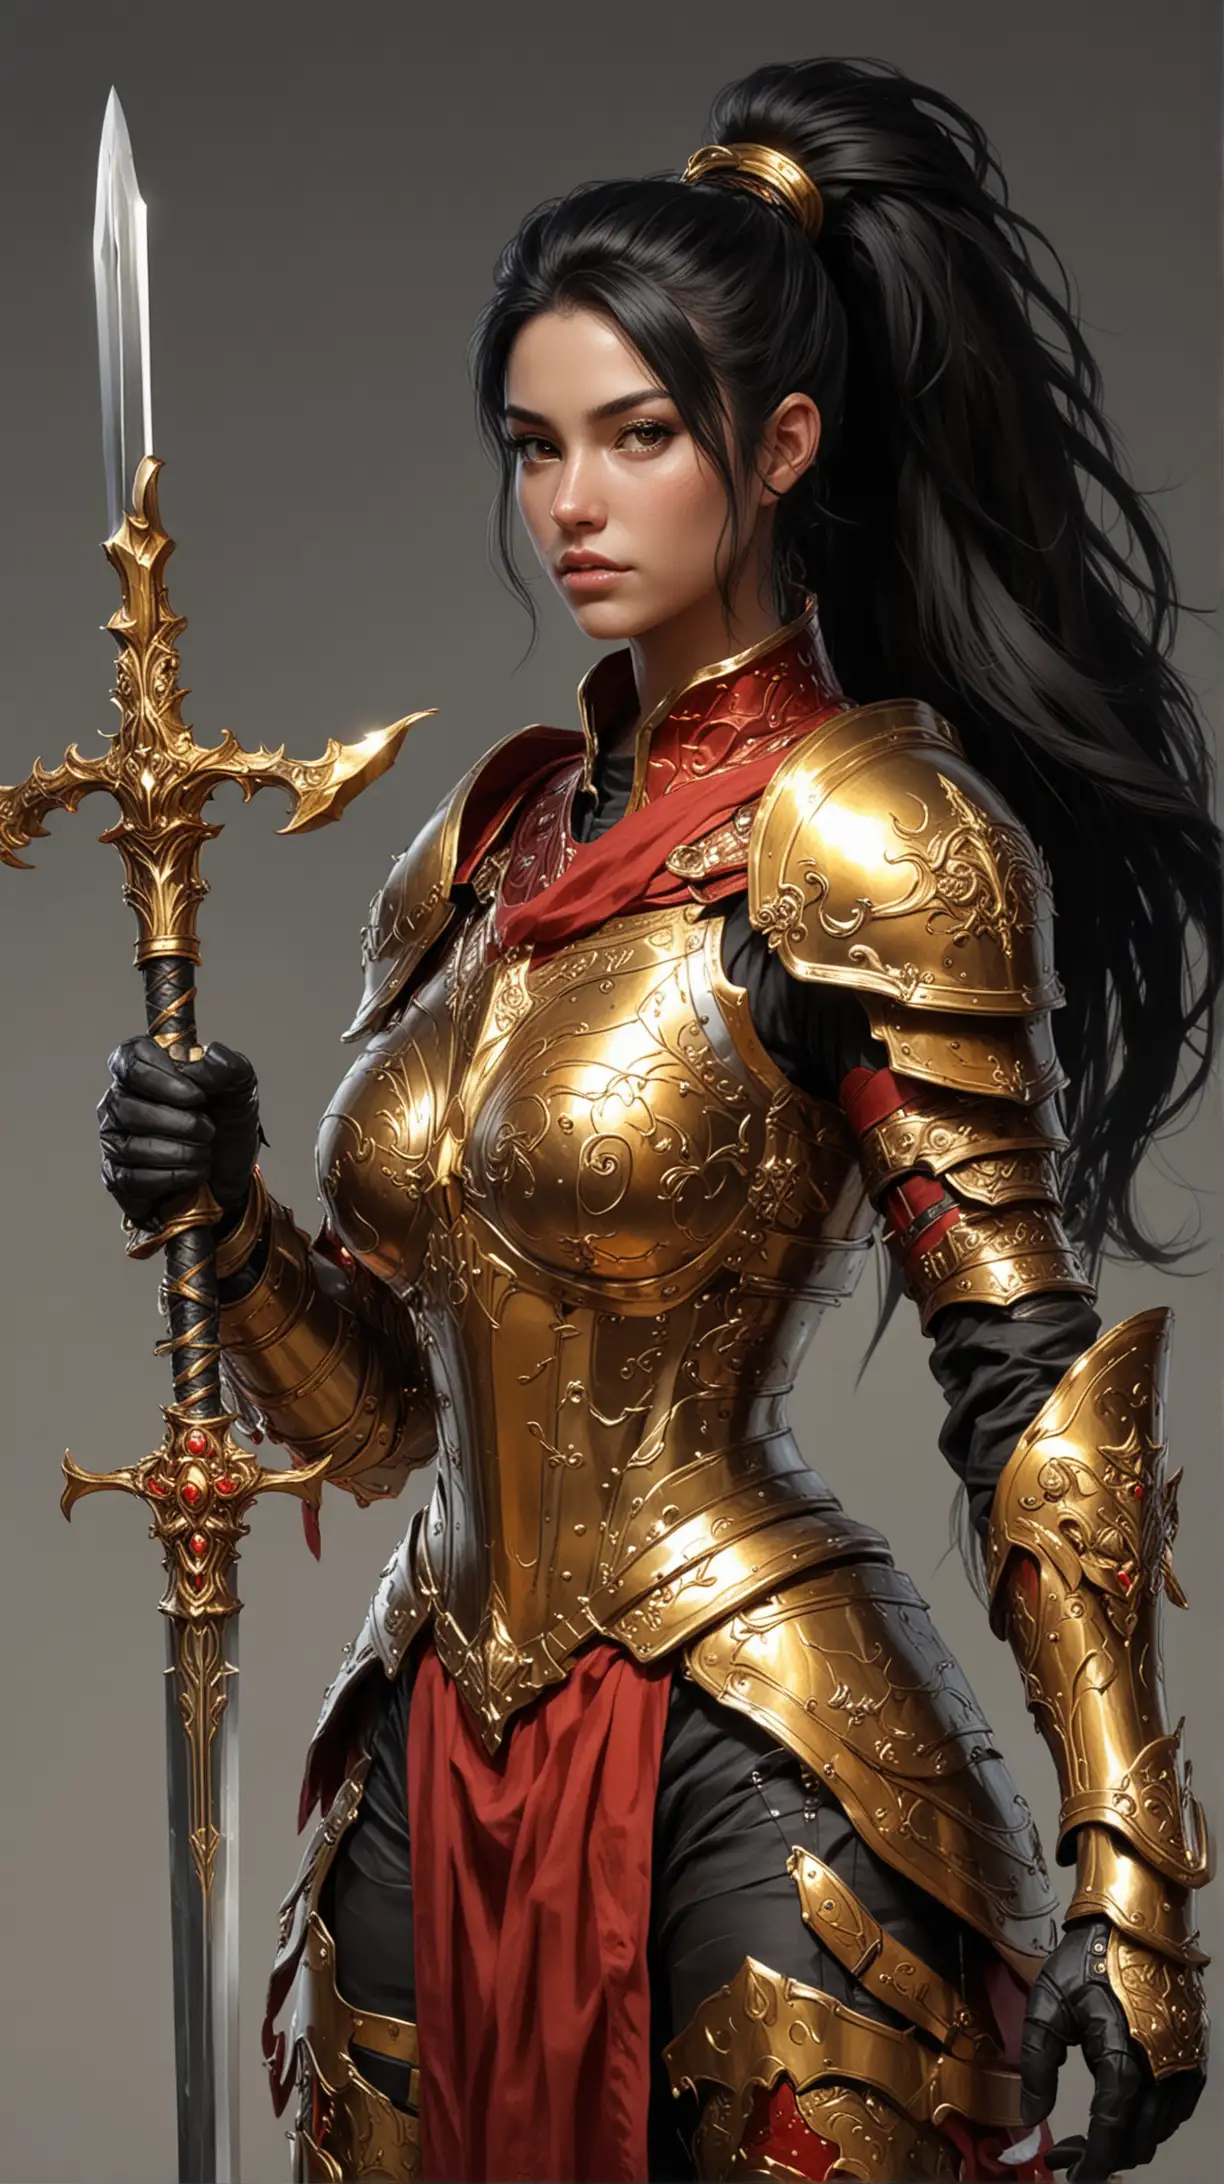 Paladin Warrior with Sword and Scepter in Red and Gold Armor